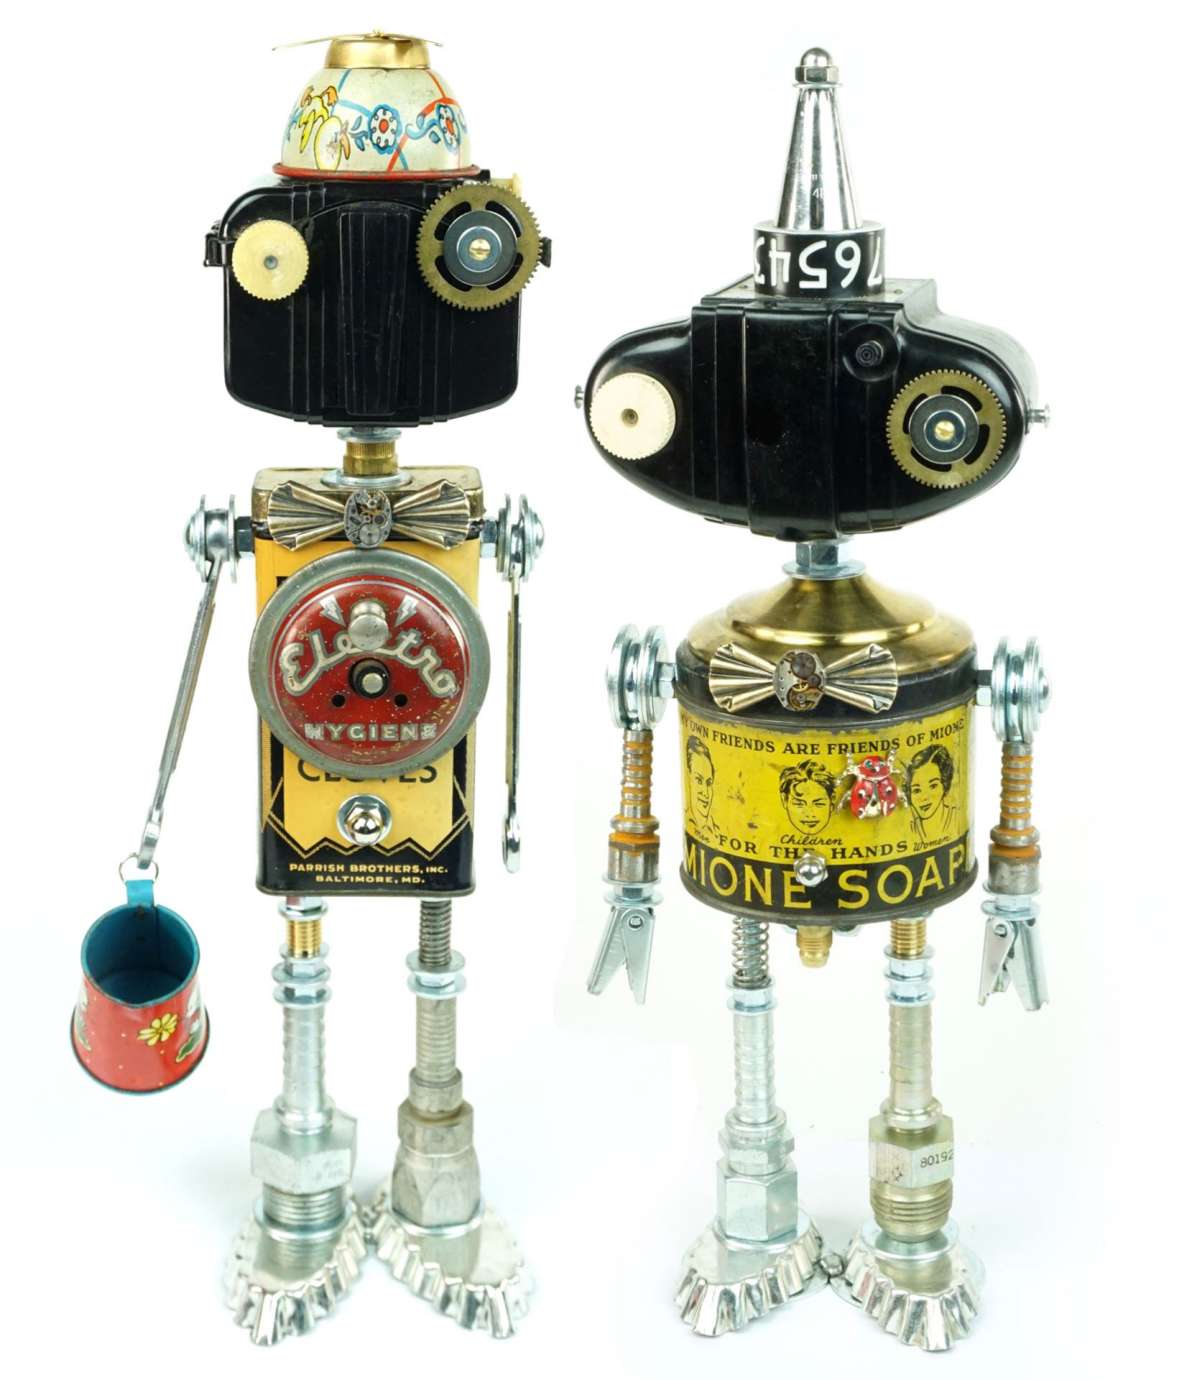 Small sculptures made from found objects by artist Amy Flynn